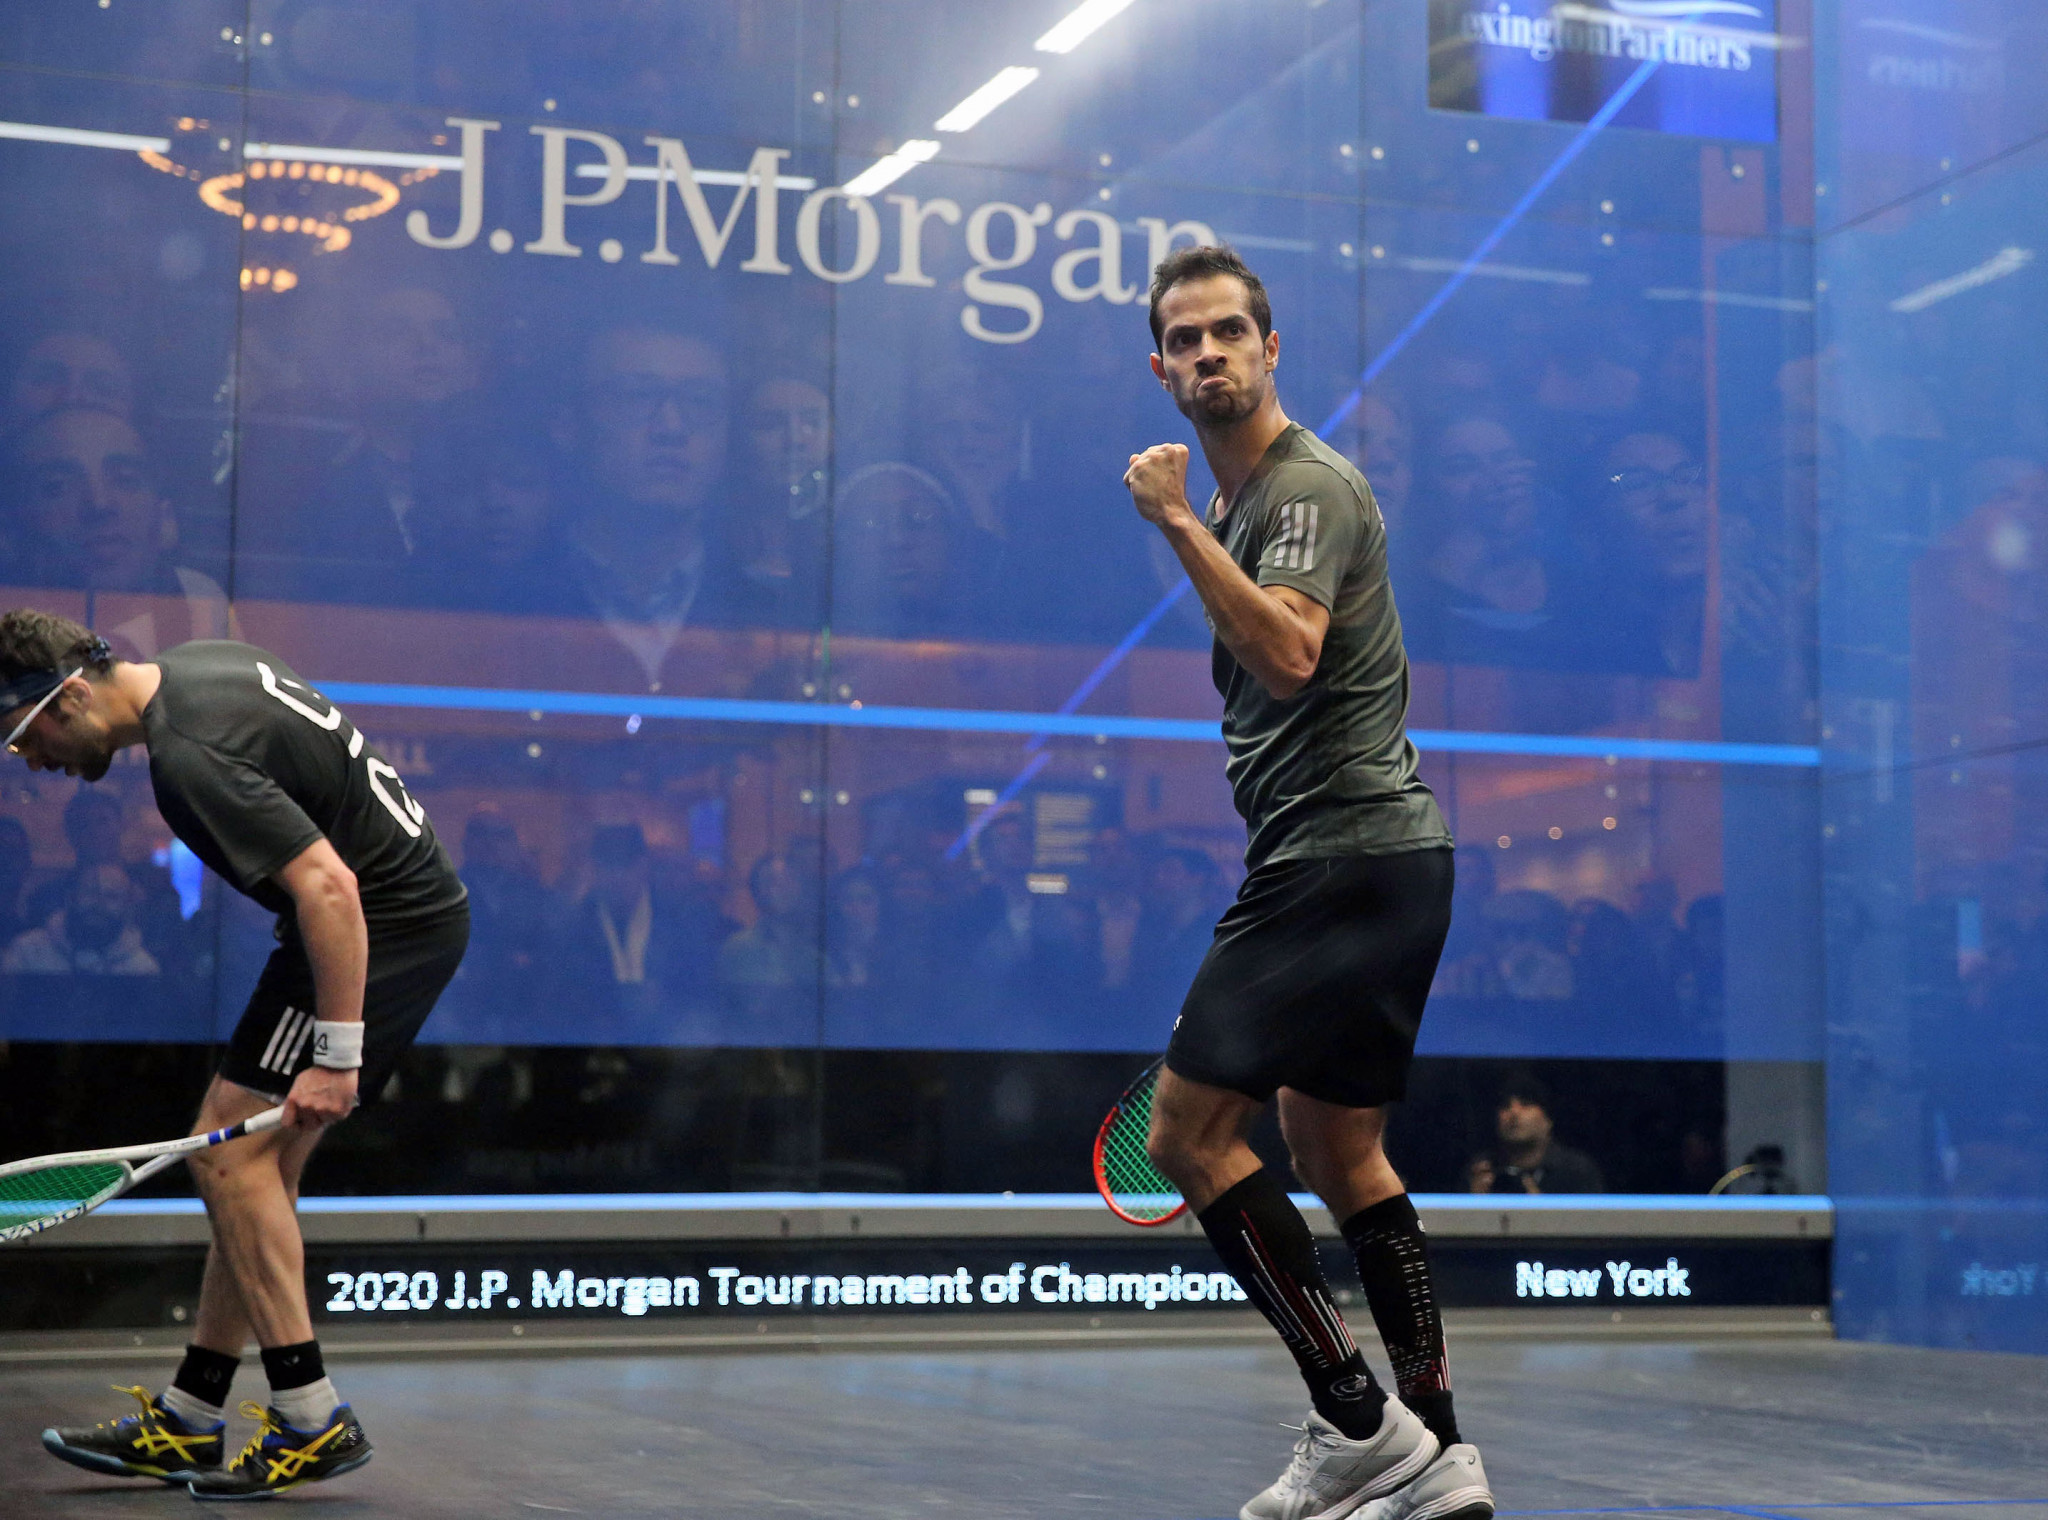 Mexico’s Cesar Salazar earned a hard-fought win over home player Chris Hanson in the first round of the J.P. Morgan Tournament of Champions in New York ©PSA